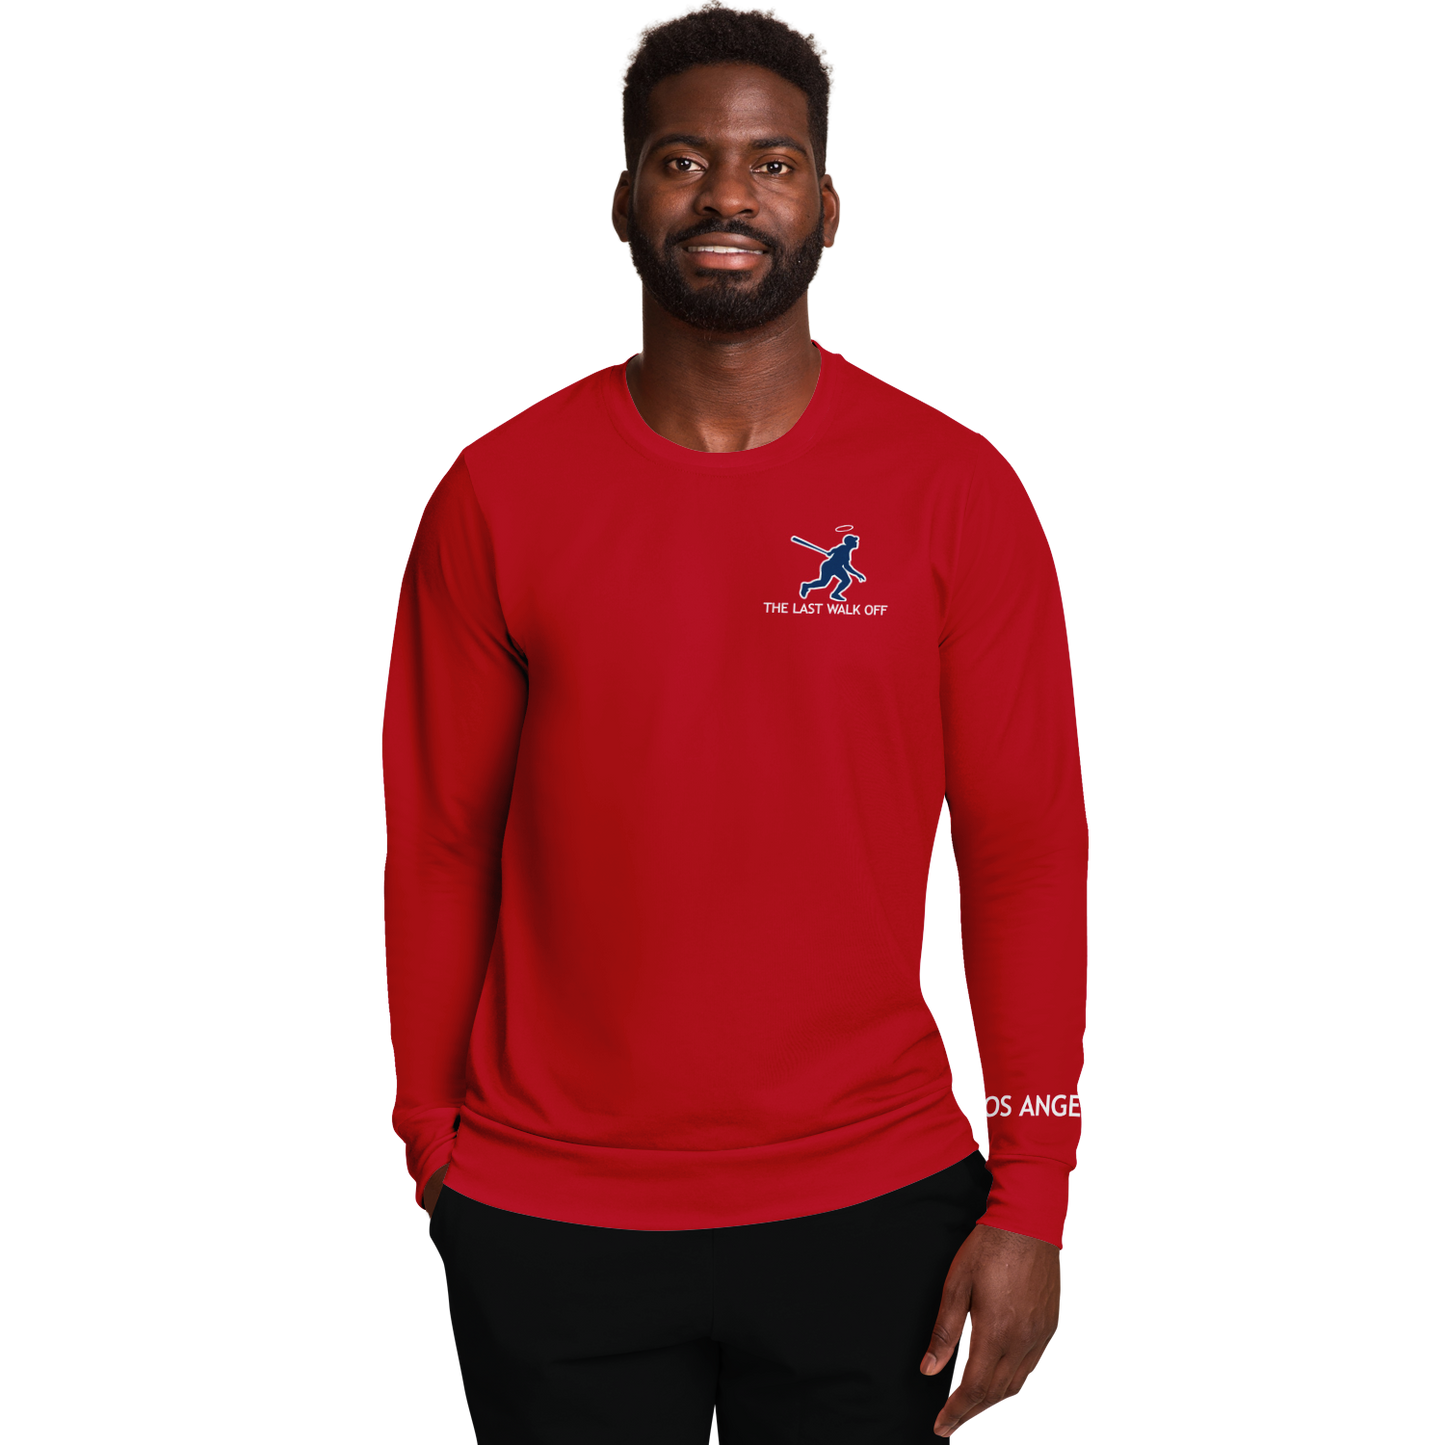 Los Angeles Red Long Sleeve Shirt